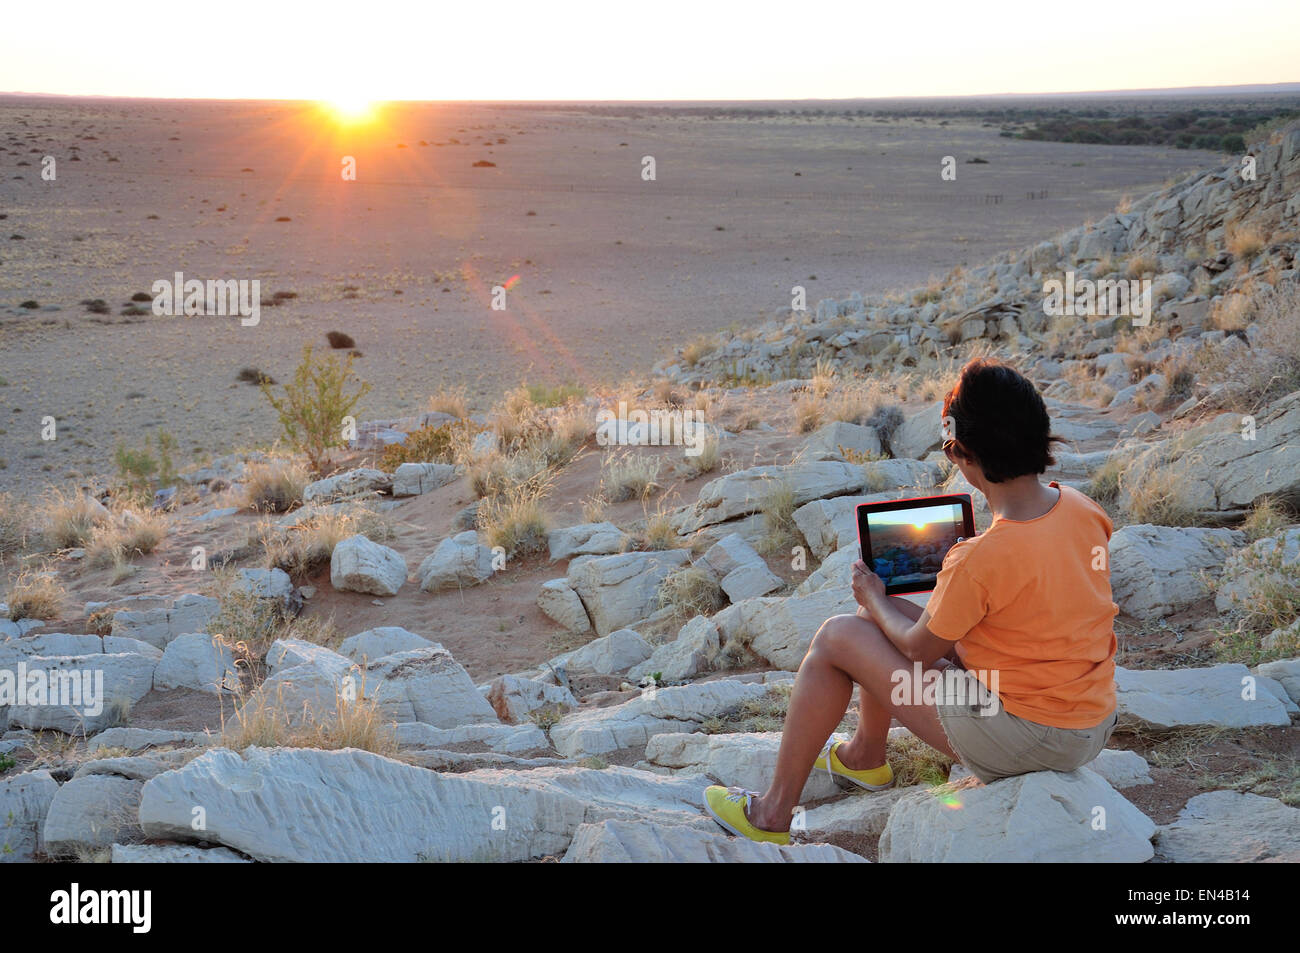 Woman photographing sunset with ipad in Namib Desert, Solitaire, Namib Desert, Republic of Namibia Stock Photo